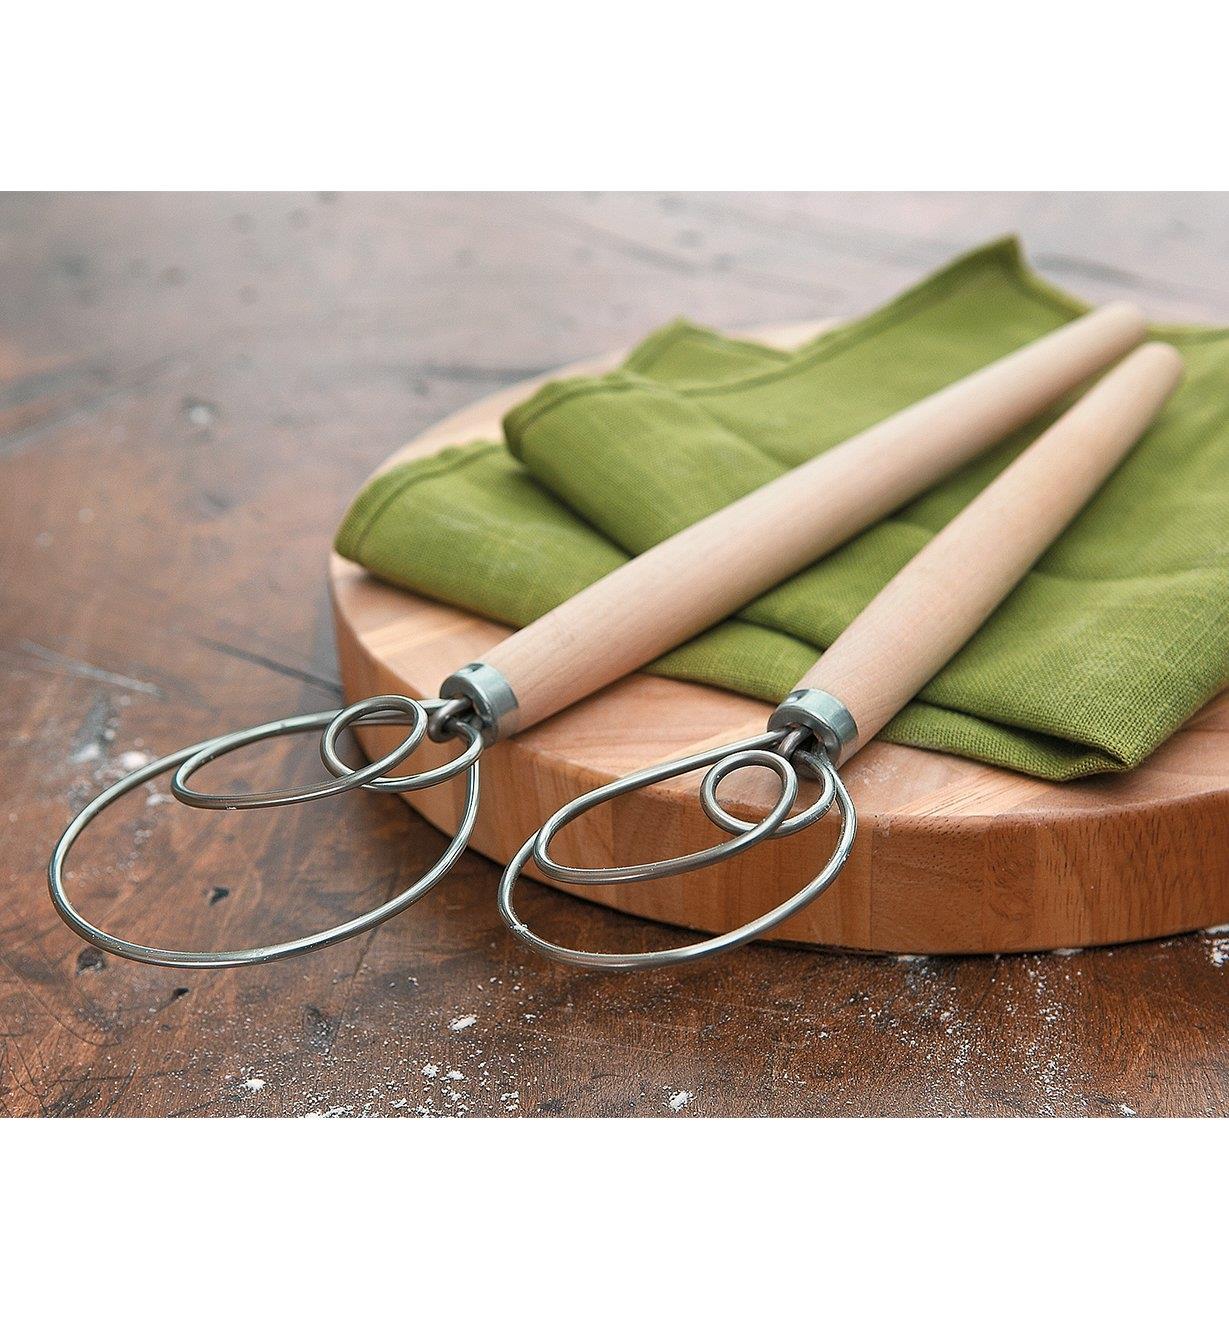 Both sizes of Danish Dough Whisks lying across a cutting board